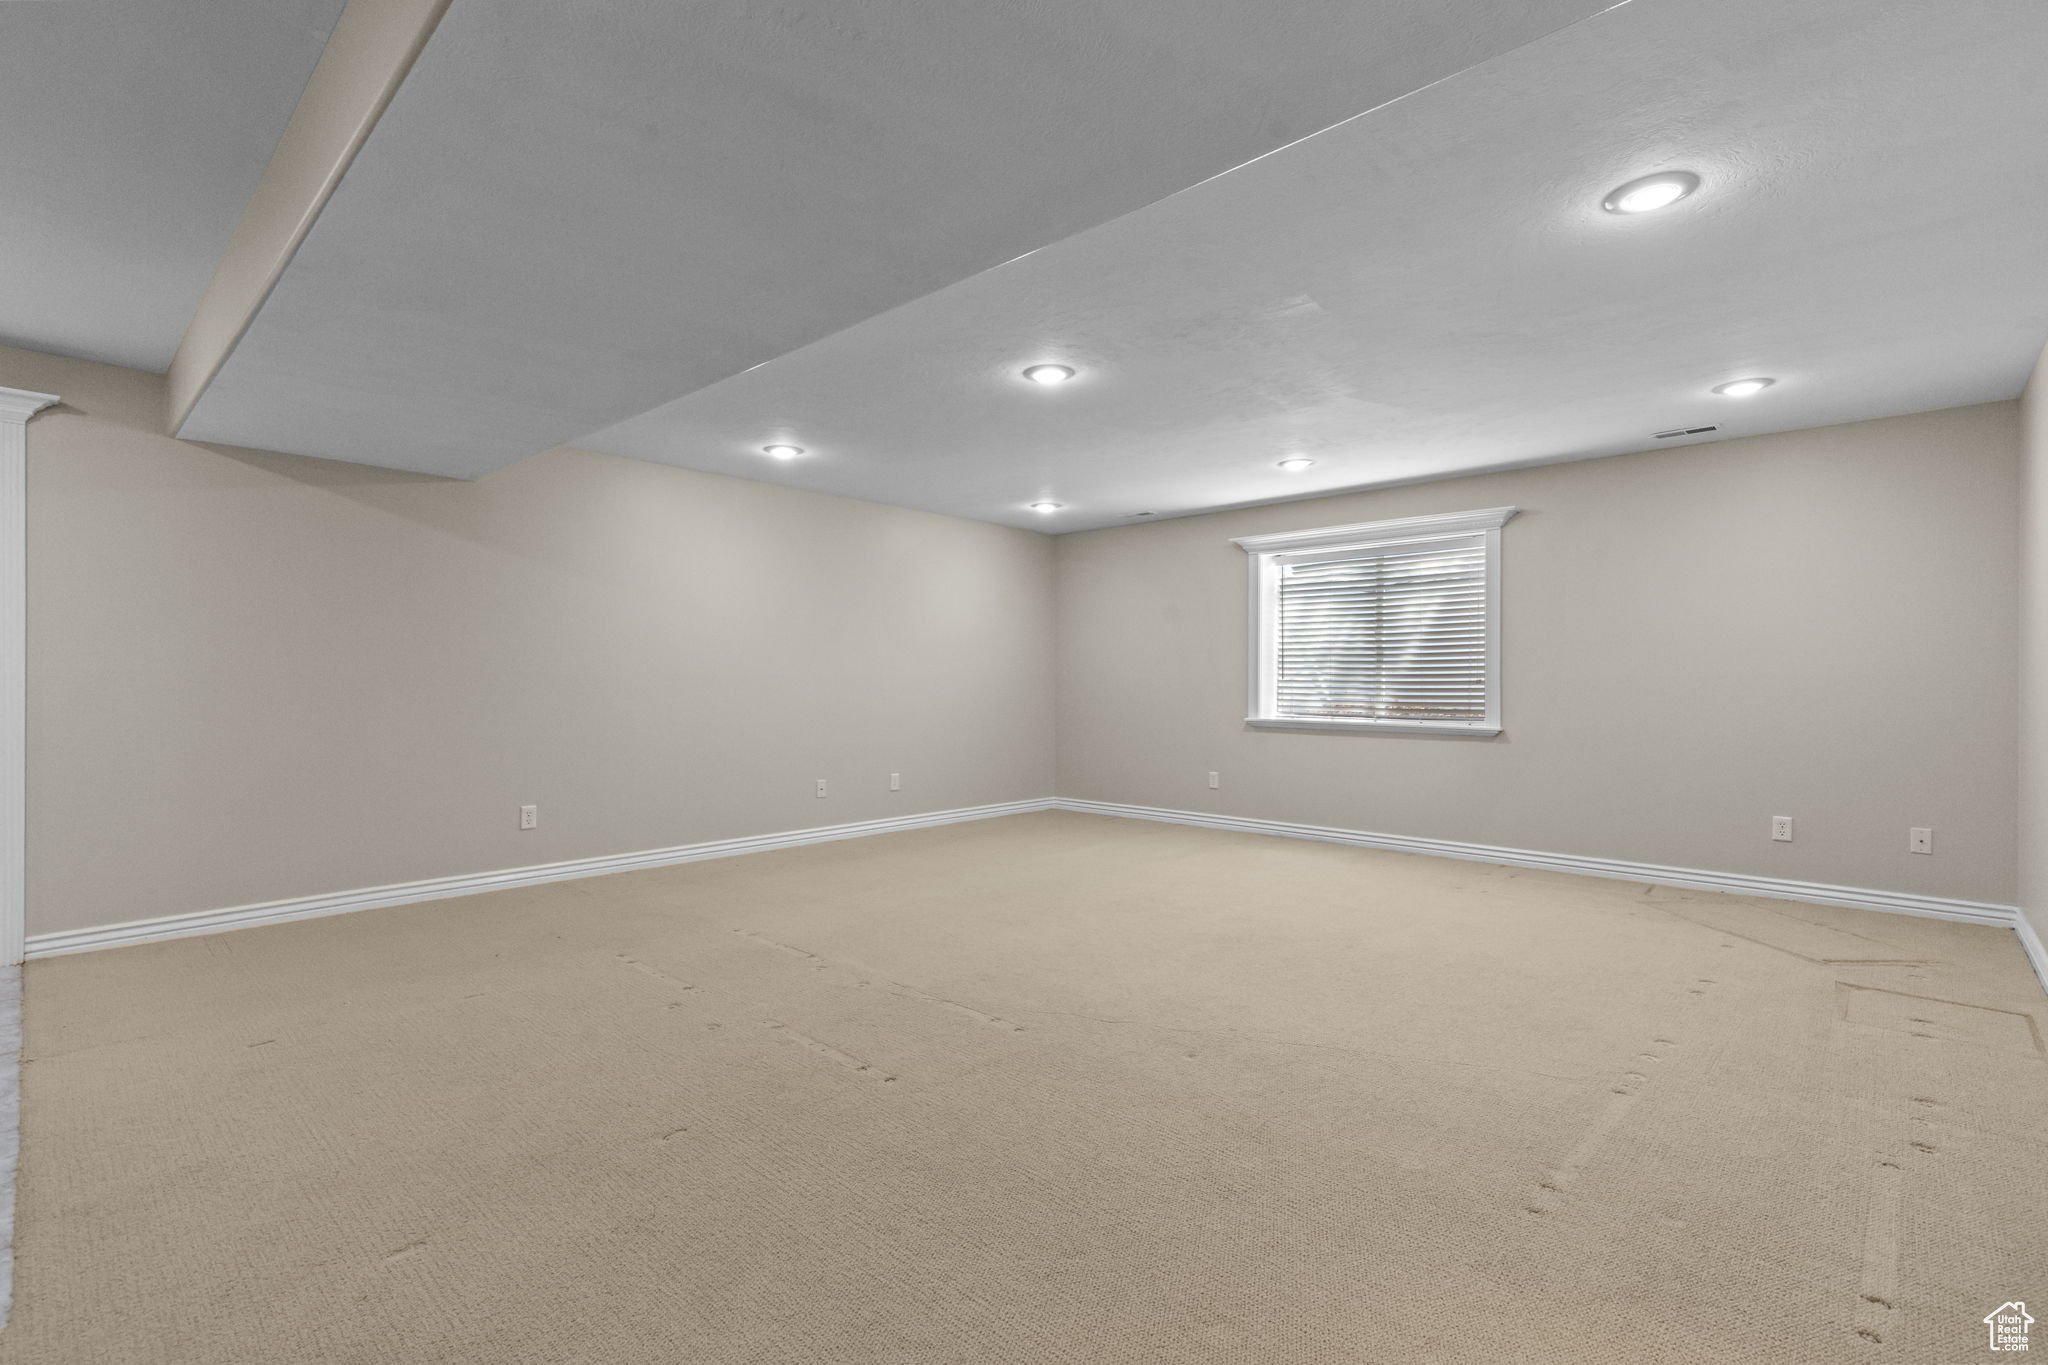 Basement living room with carpet